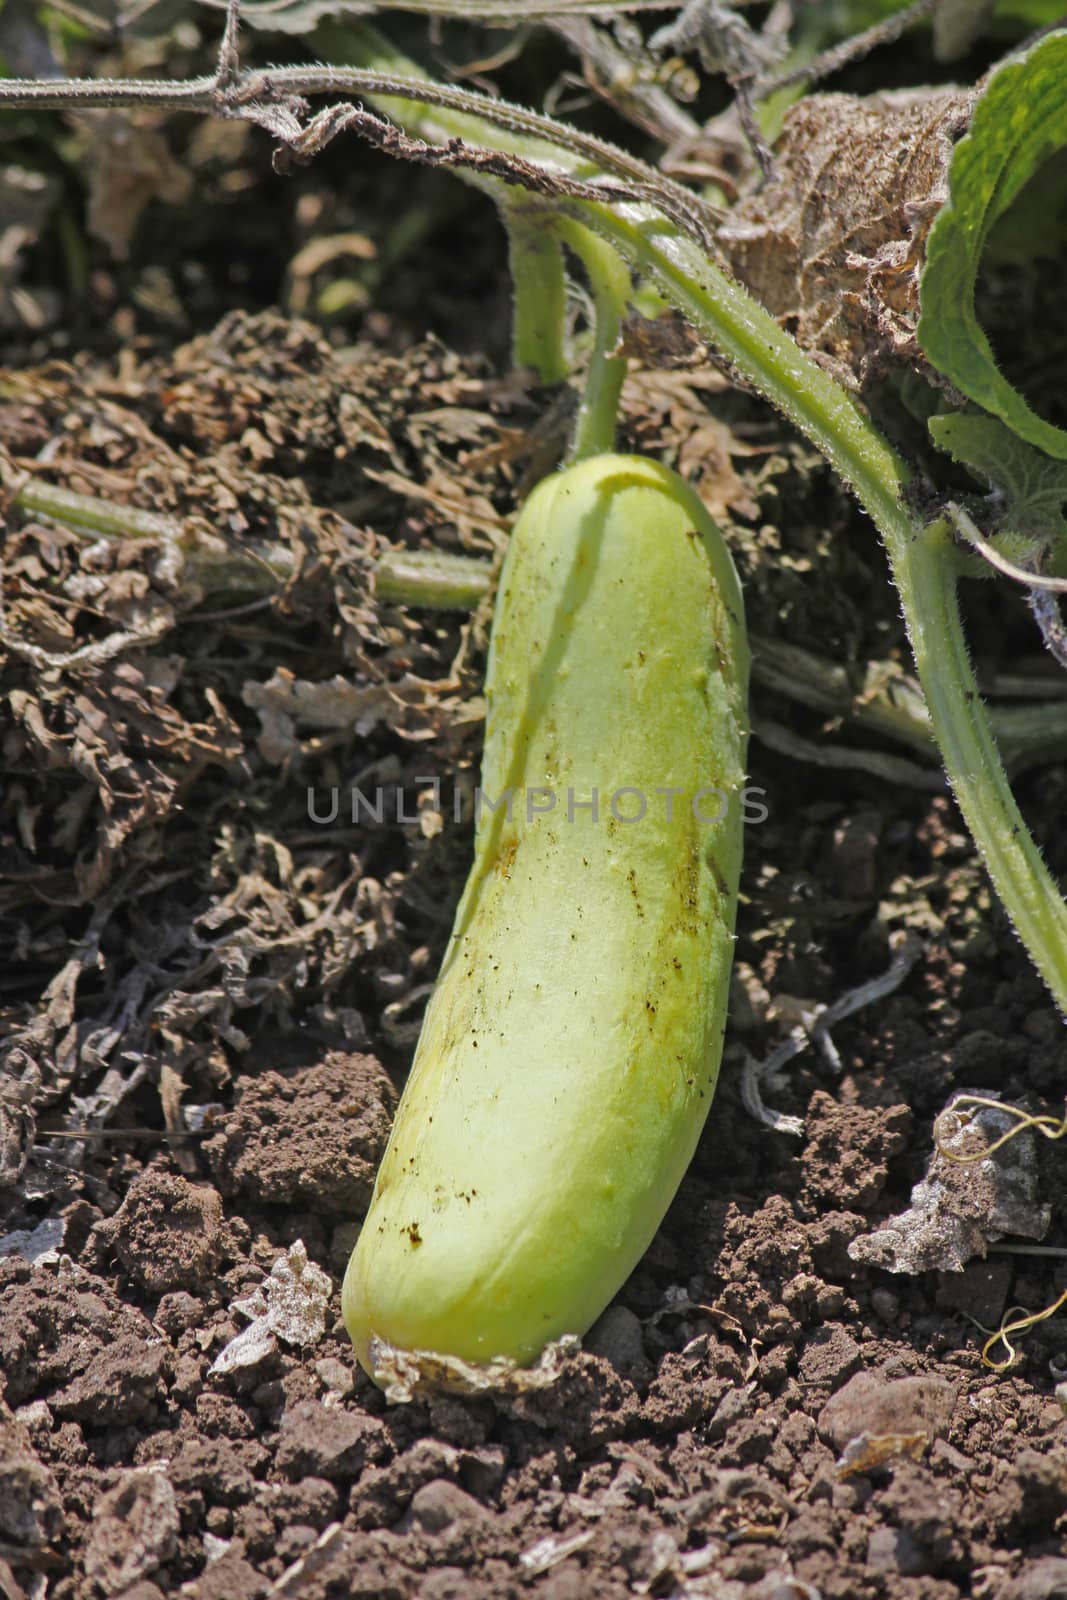 Cucumber, Cucumis sativus  is a widely cultivated plant in the gourd family Cucurbitaceae. It is a creeping vine that bears cylindrical fruits that are used as culinary vegetables